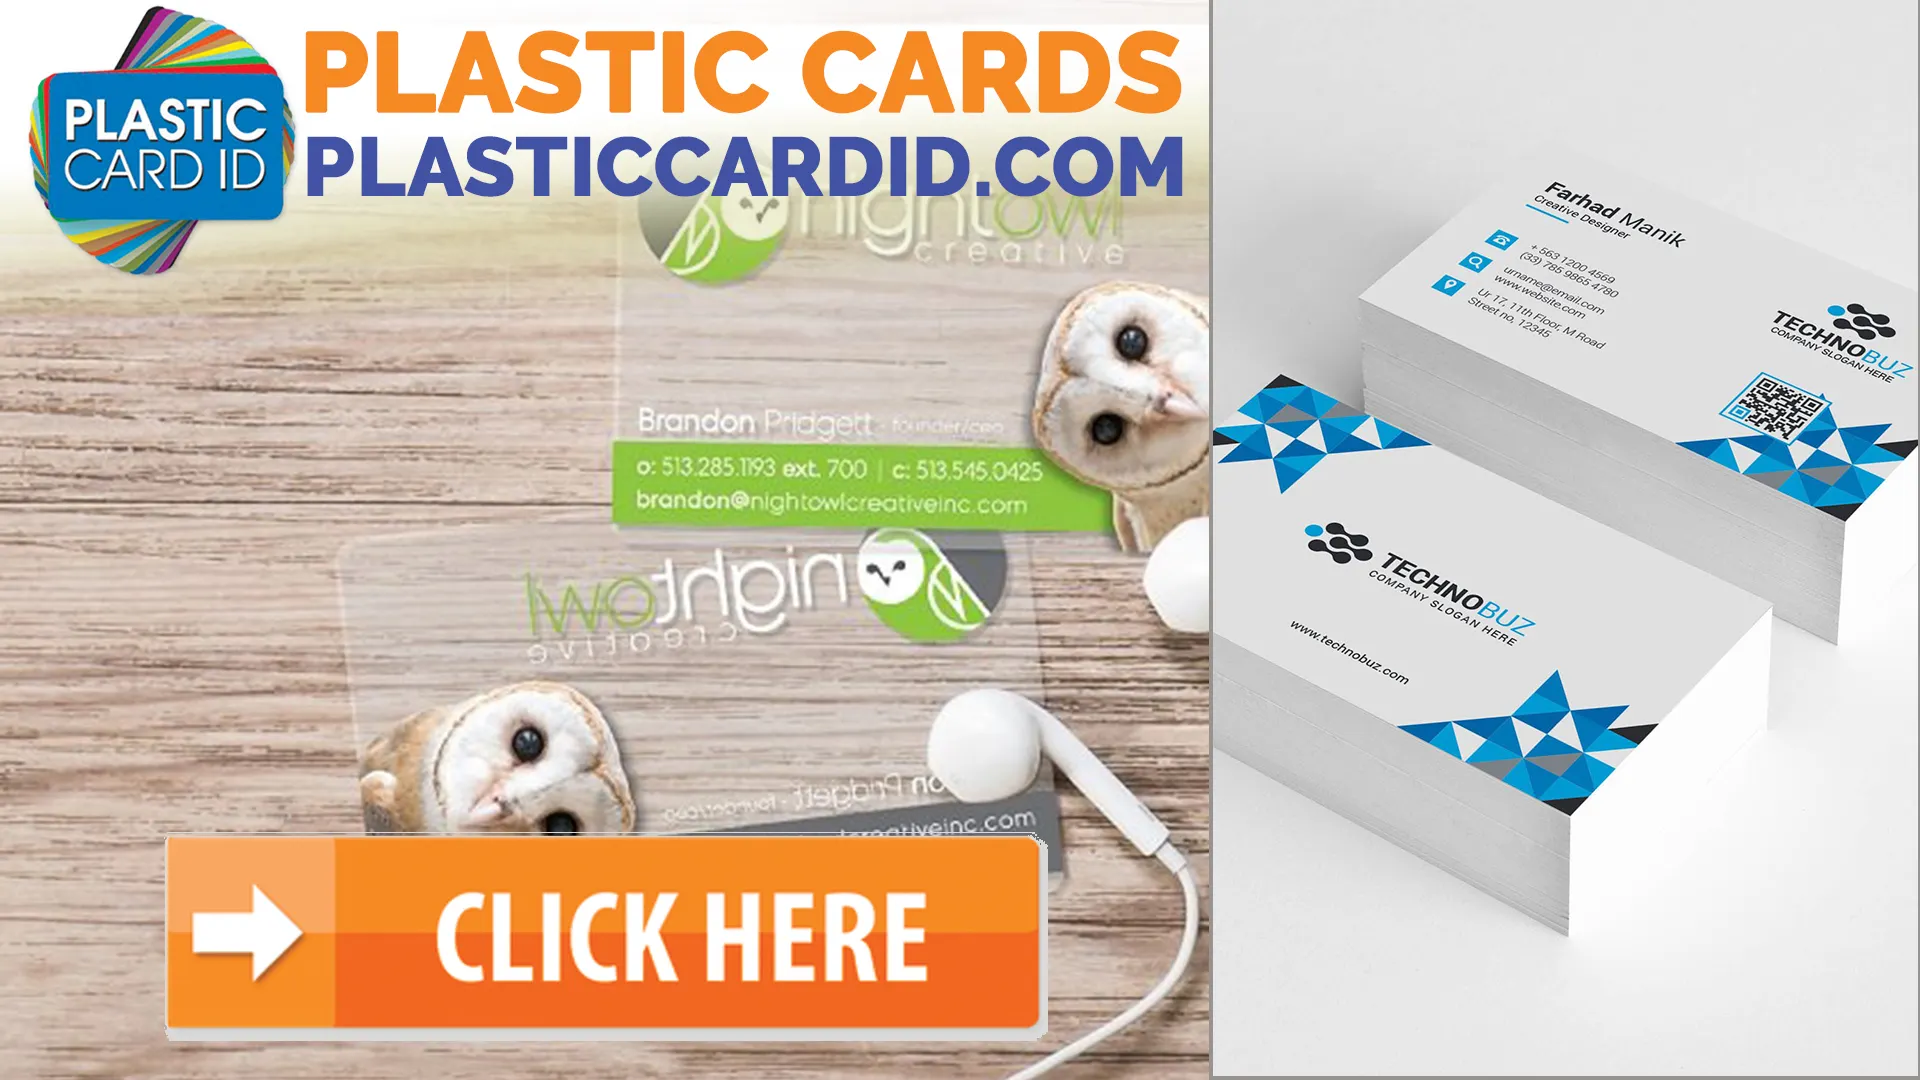 Welcome to the World of Durable, High-Quality Plastic Cards